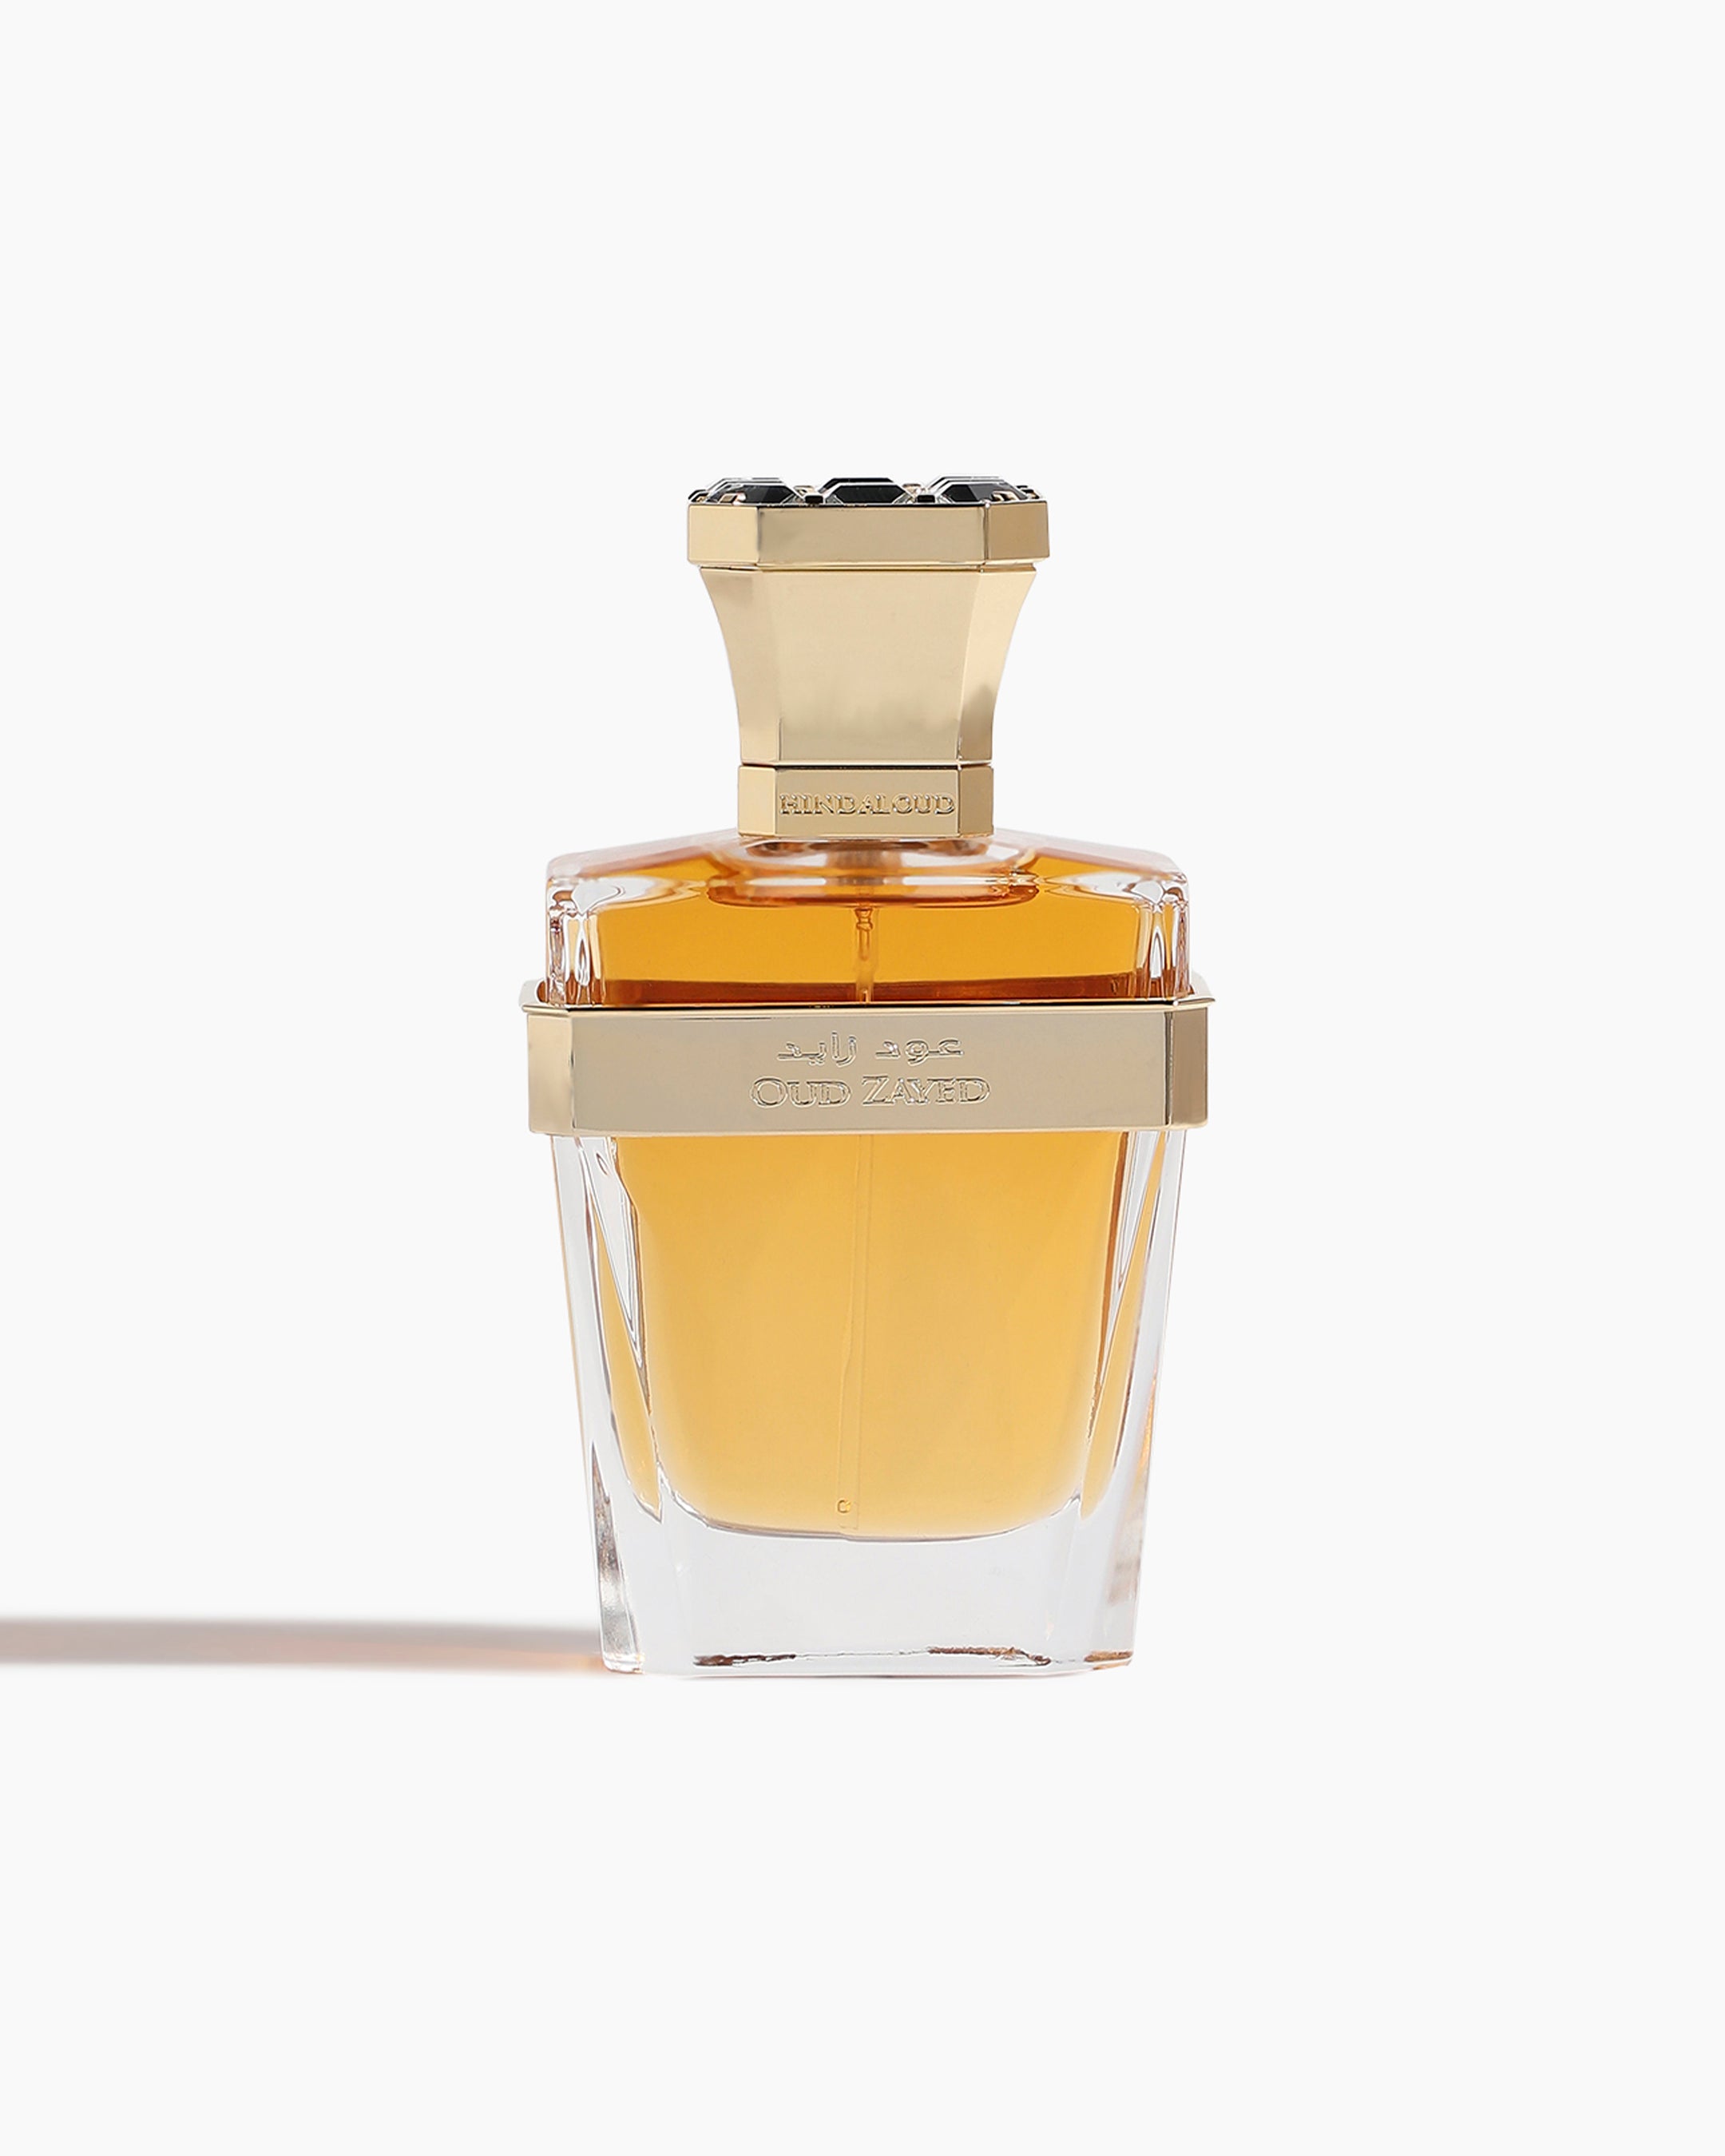 Oud Zayed Parfum (50ml) from Hind Al Oud - MHGboutique